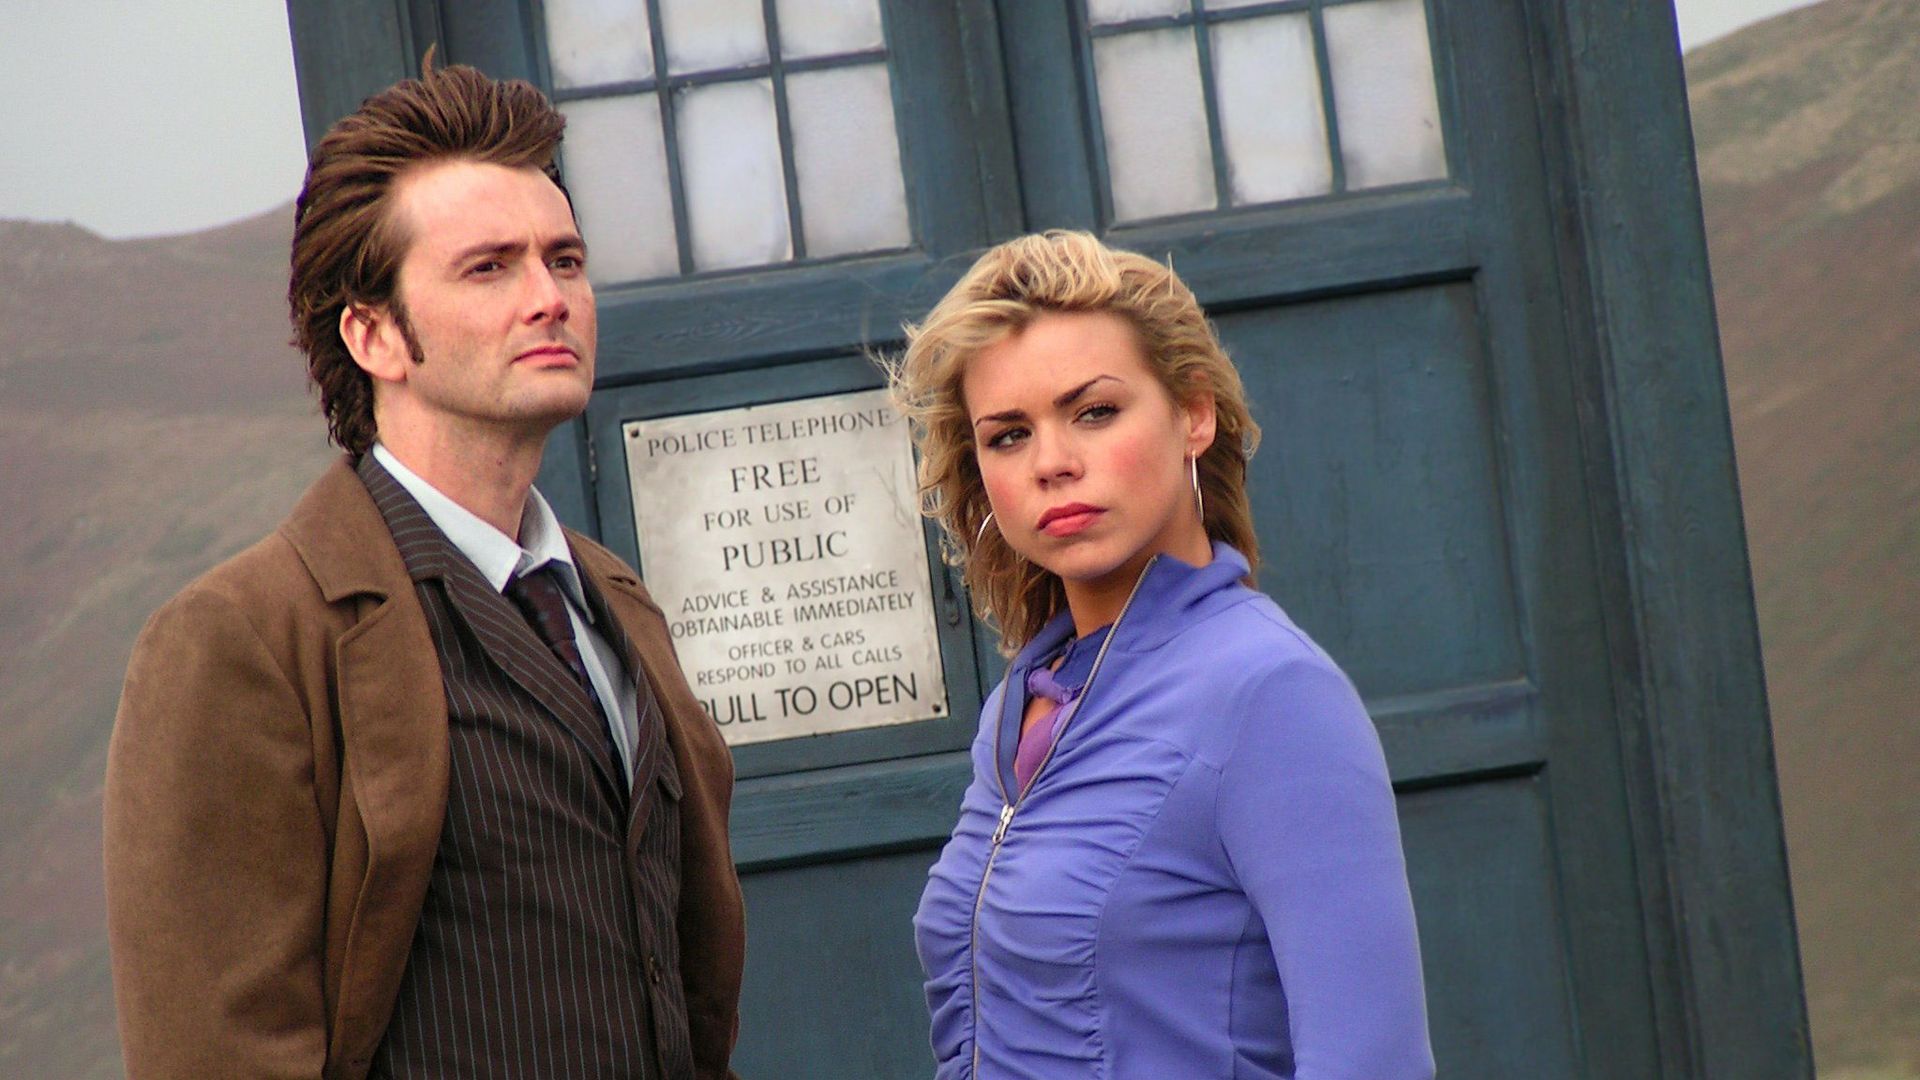 David Tennant and Billie Piper in character as The Doctor and Rose Tyler in Doctor Who